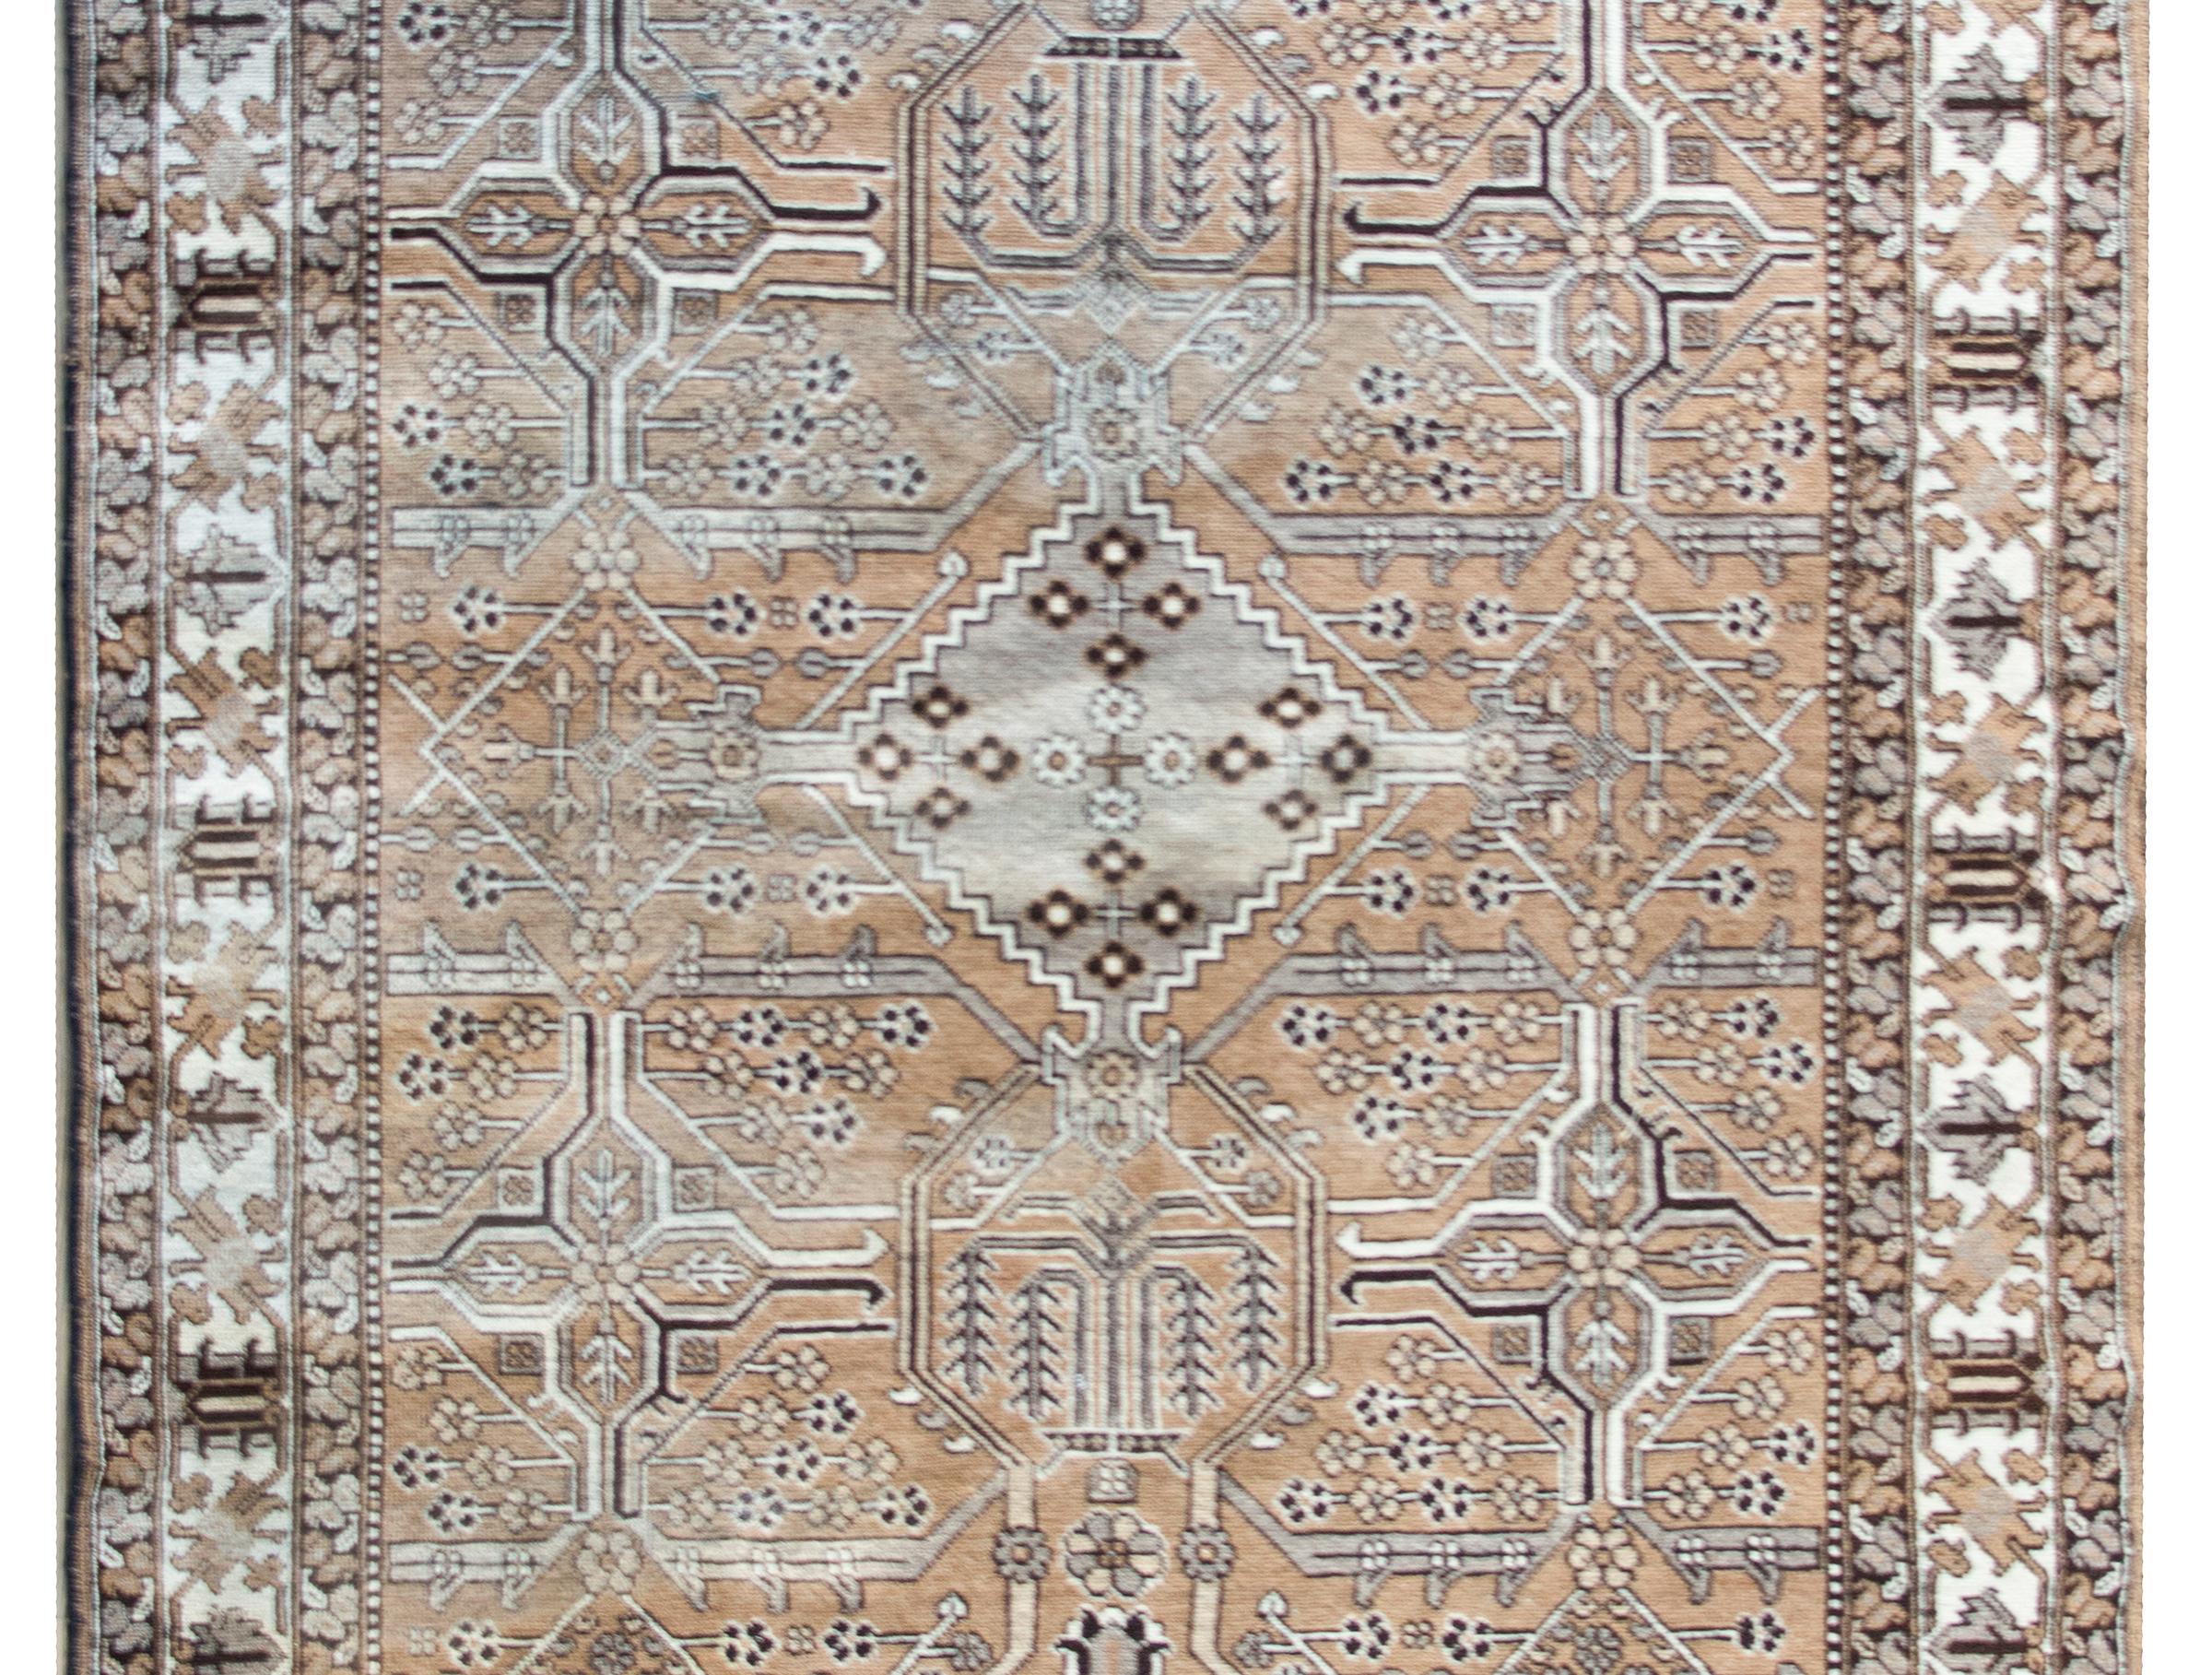 A wonderful vintage Persian Bakhtiari rug with a wonderful geometric patchwork pattern of myriad flowers and vines arranged in a trellis pattern, surrounded by a wide border with a large-scale floral and leaf pattern flanked by a matching pair of